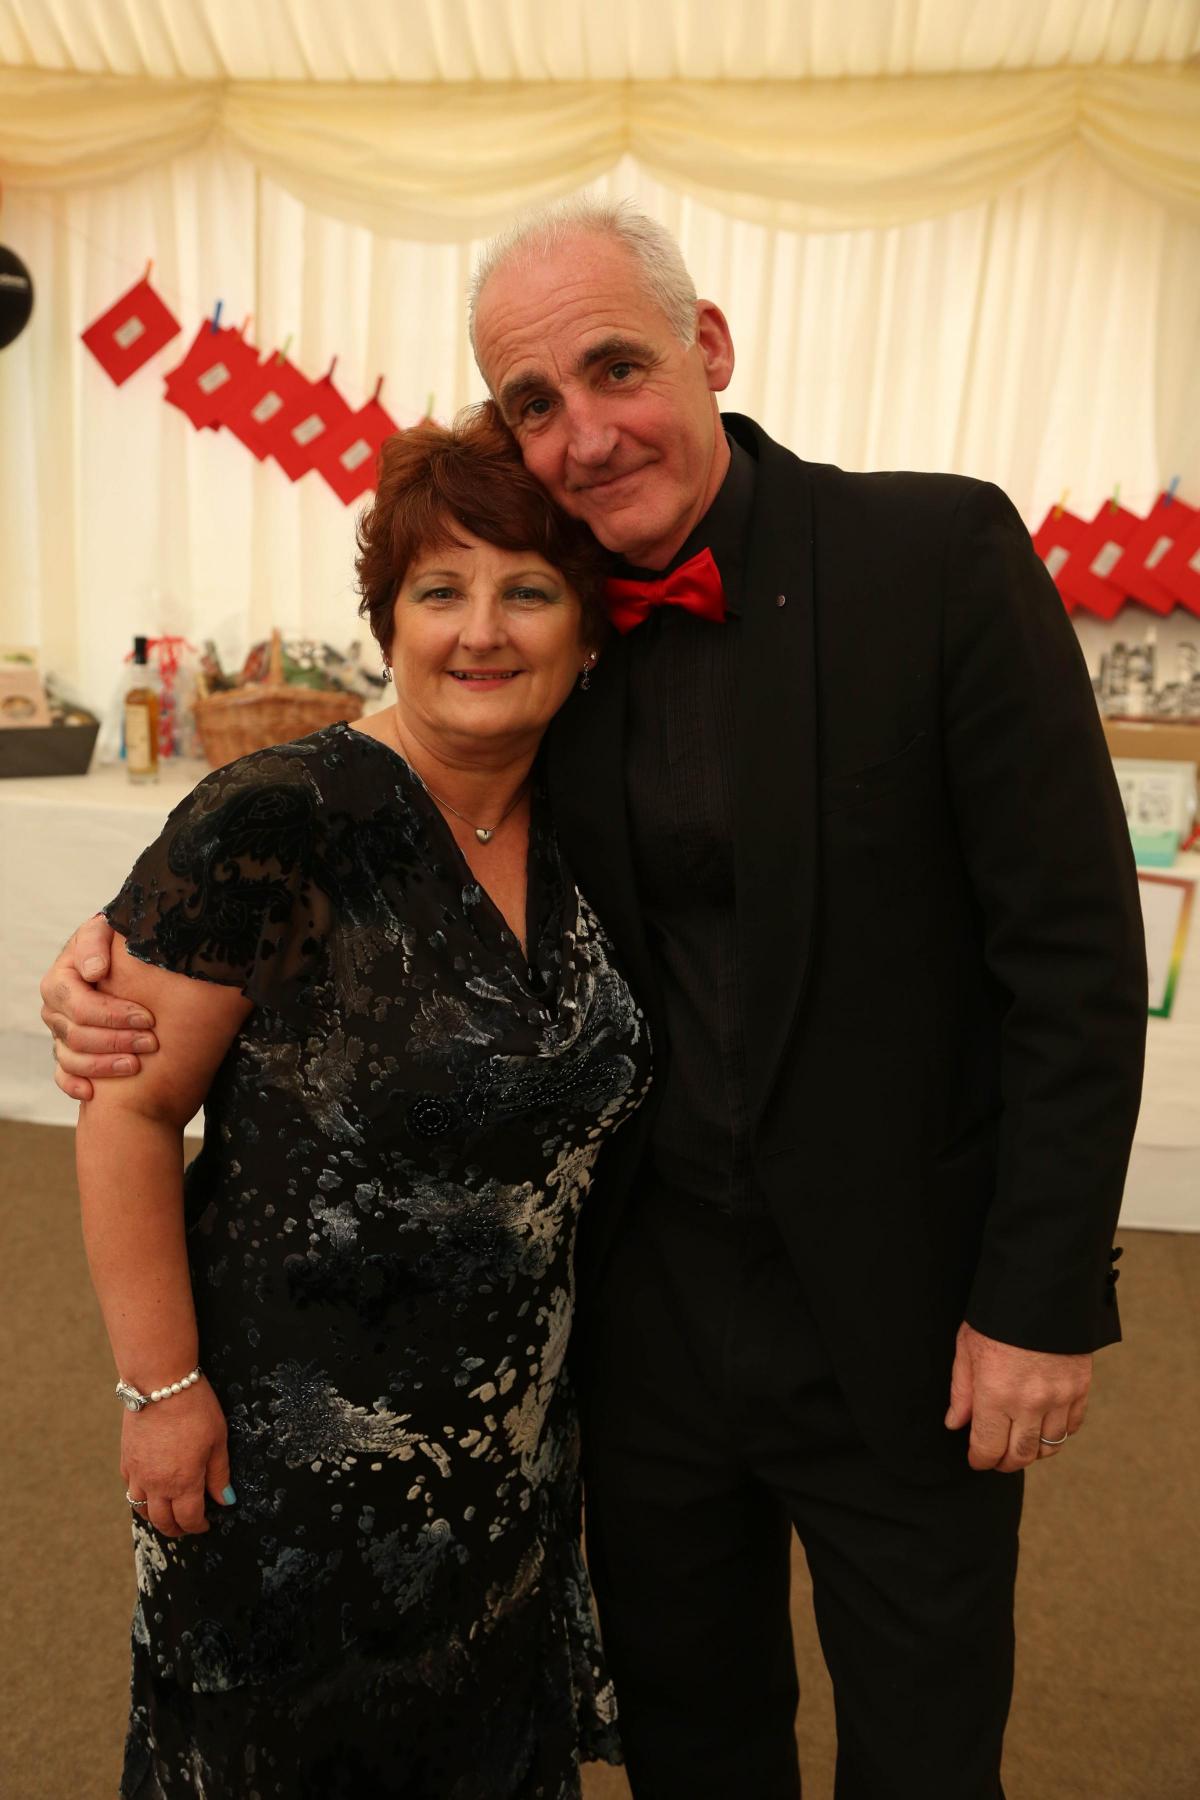 Blood Charity Ball, Leyburn, North Yorkshire. Michelle and Andrew Moffitt. Picture: TOM BANKS